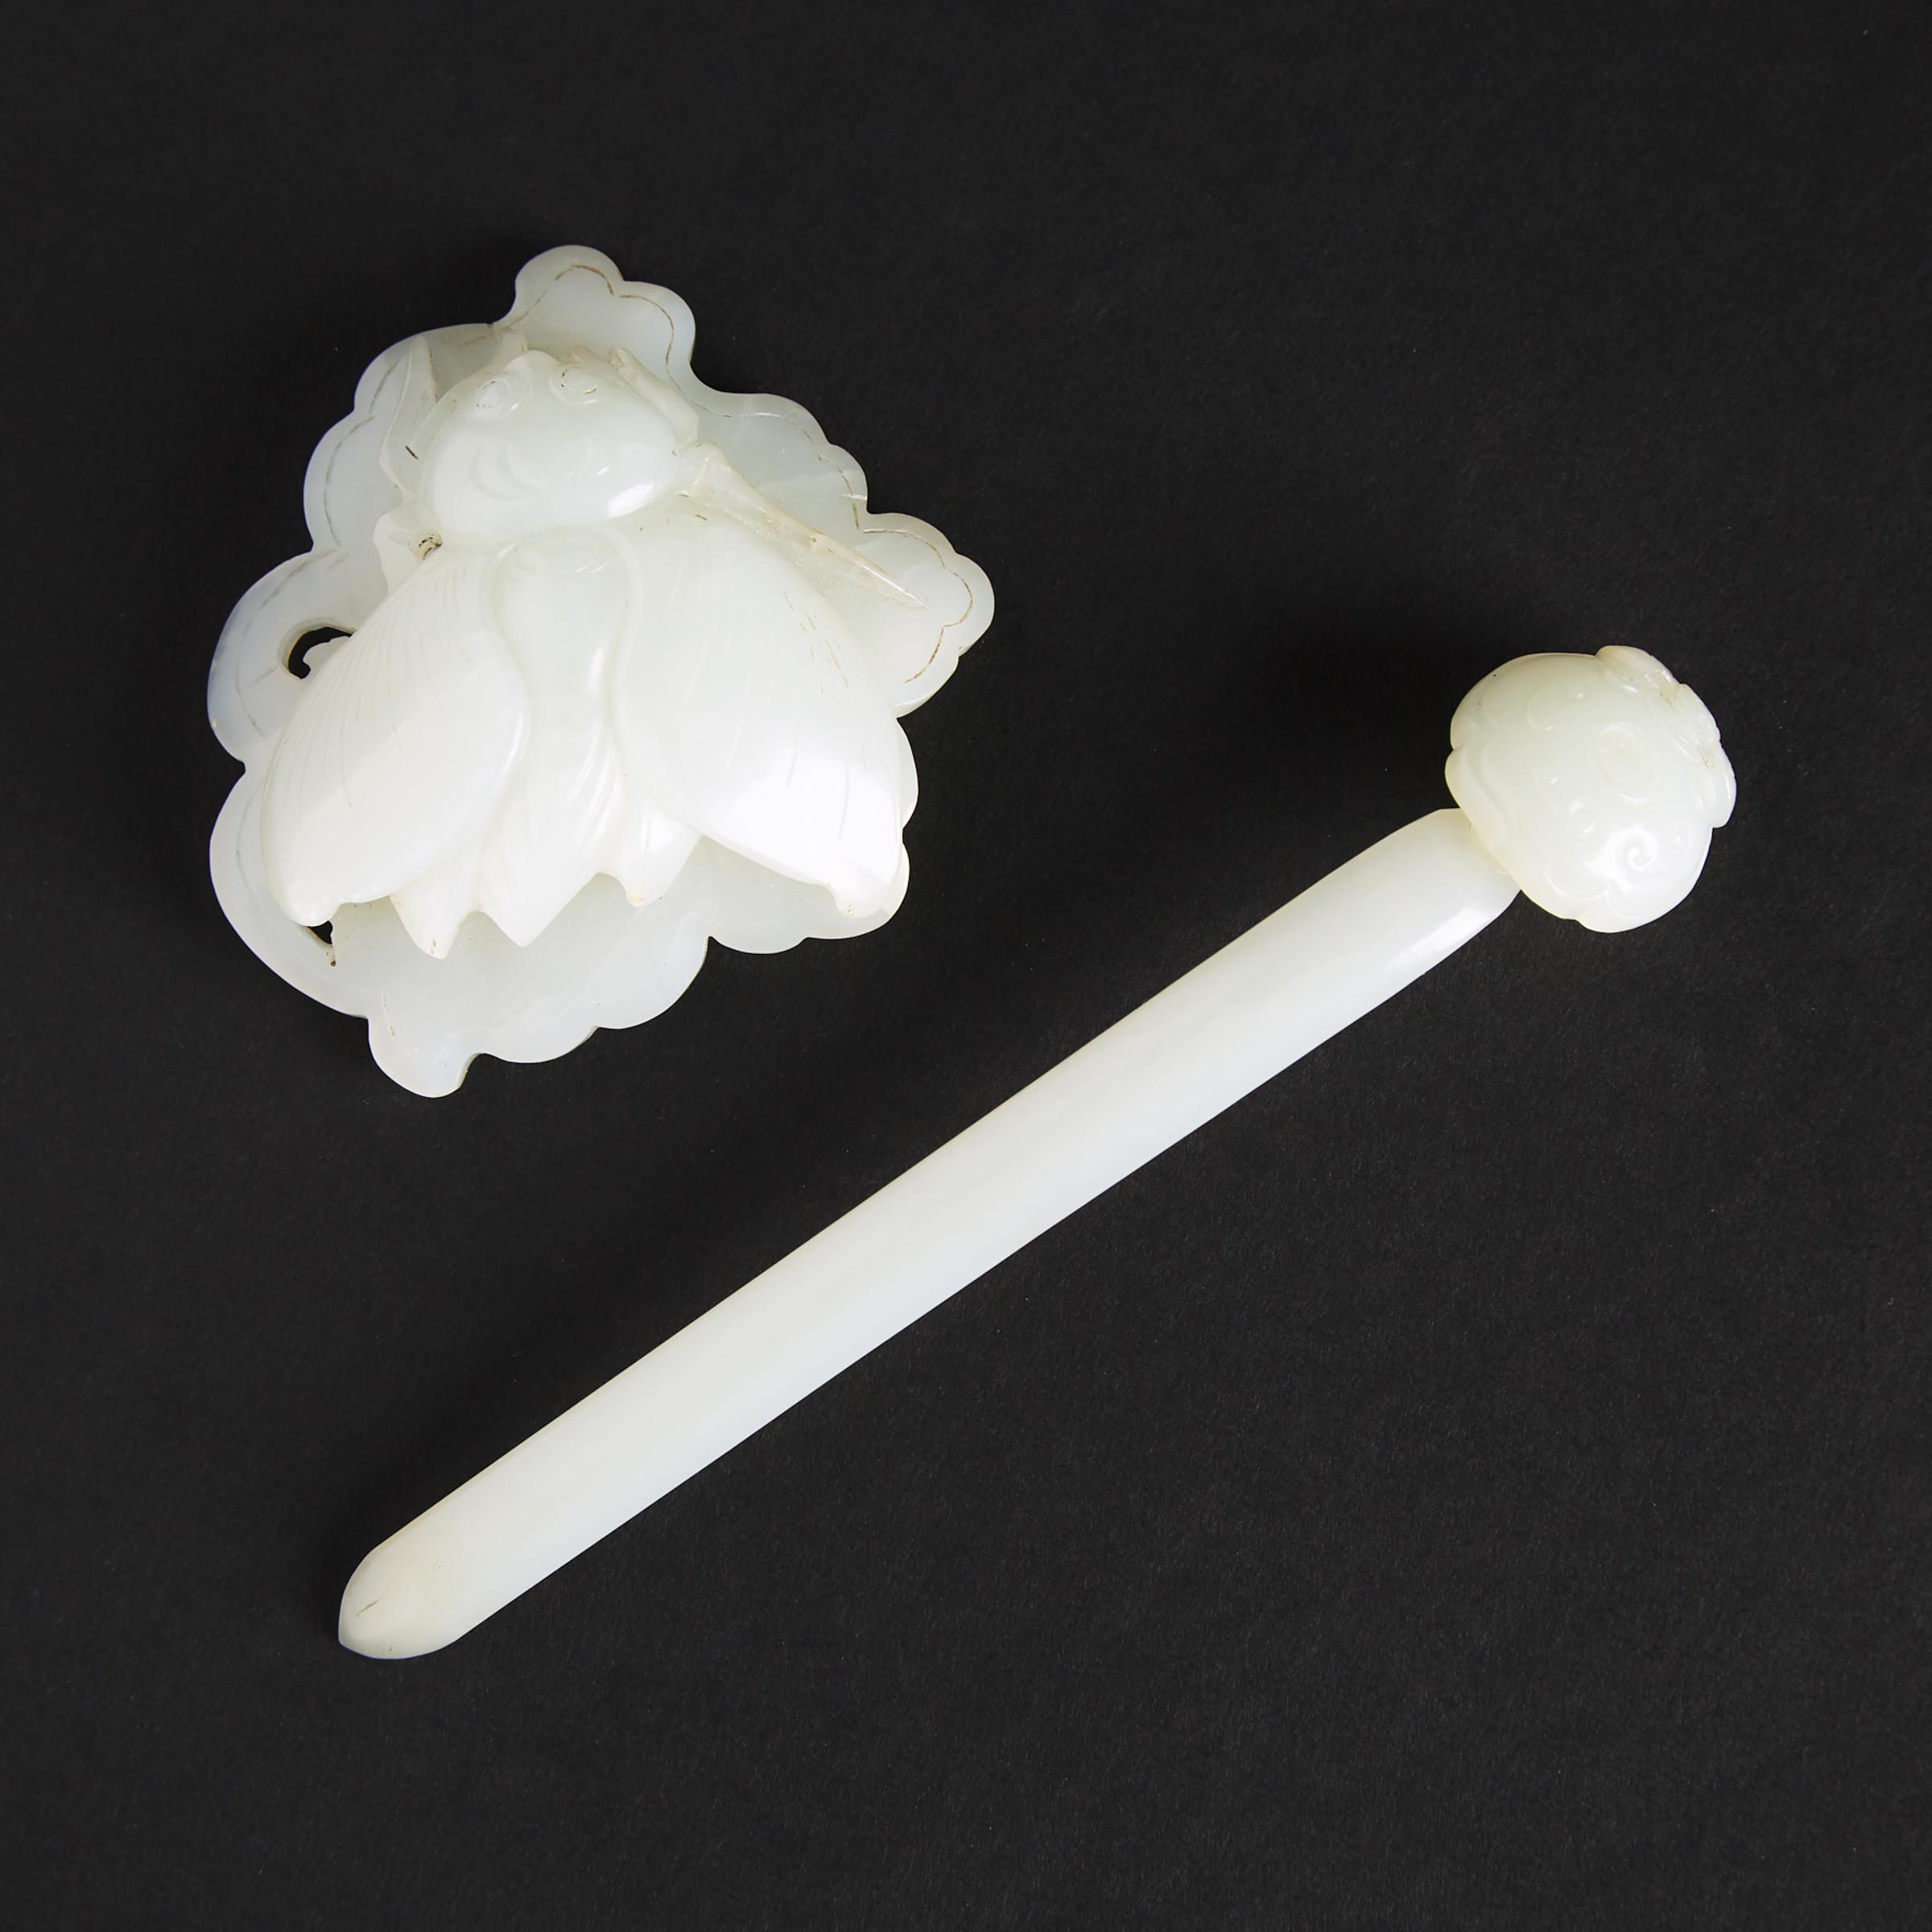 A White Jade Double-Butterfly Carving, together with a White Jade Hair Pin, Late Qing Dynasty